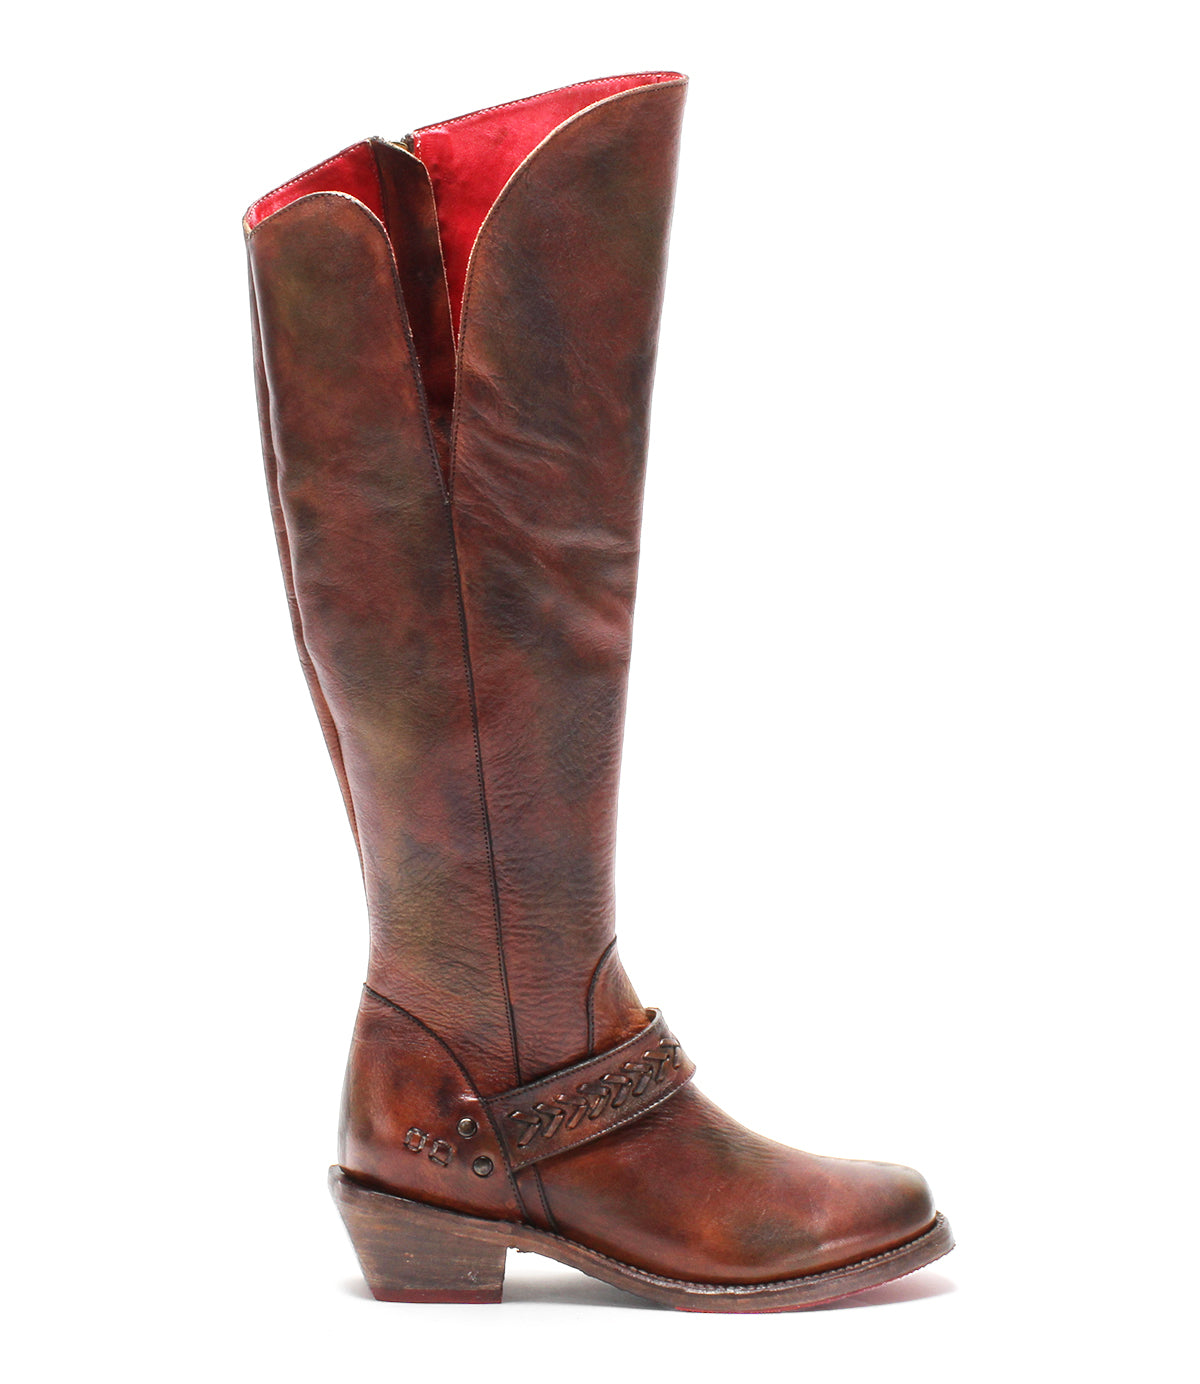 A women's brown leather riding boot called Takoma by Bed Stu.